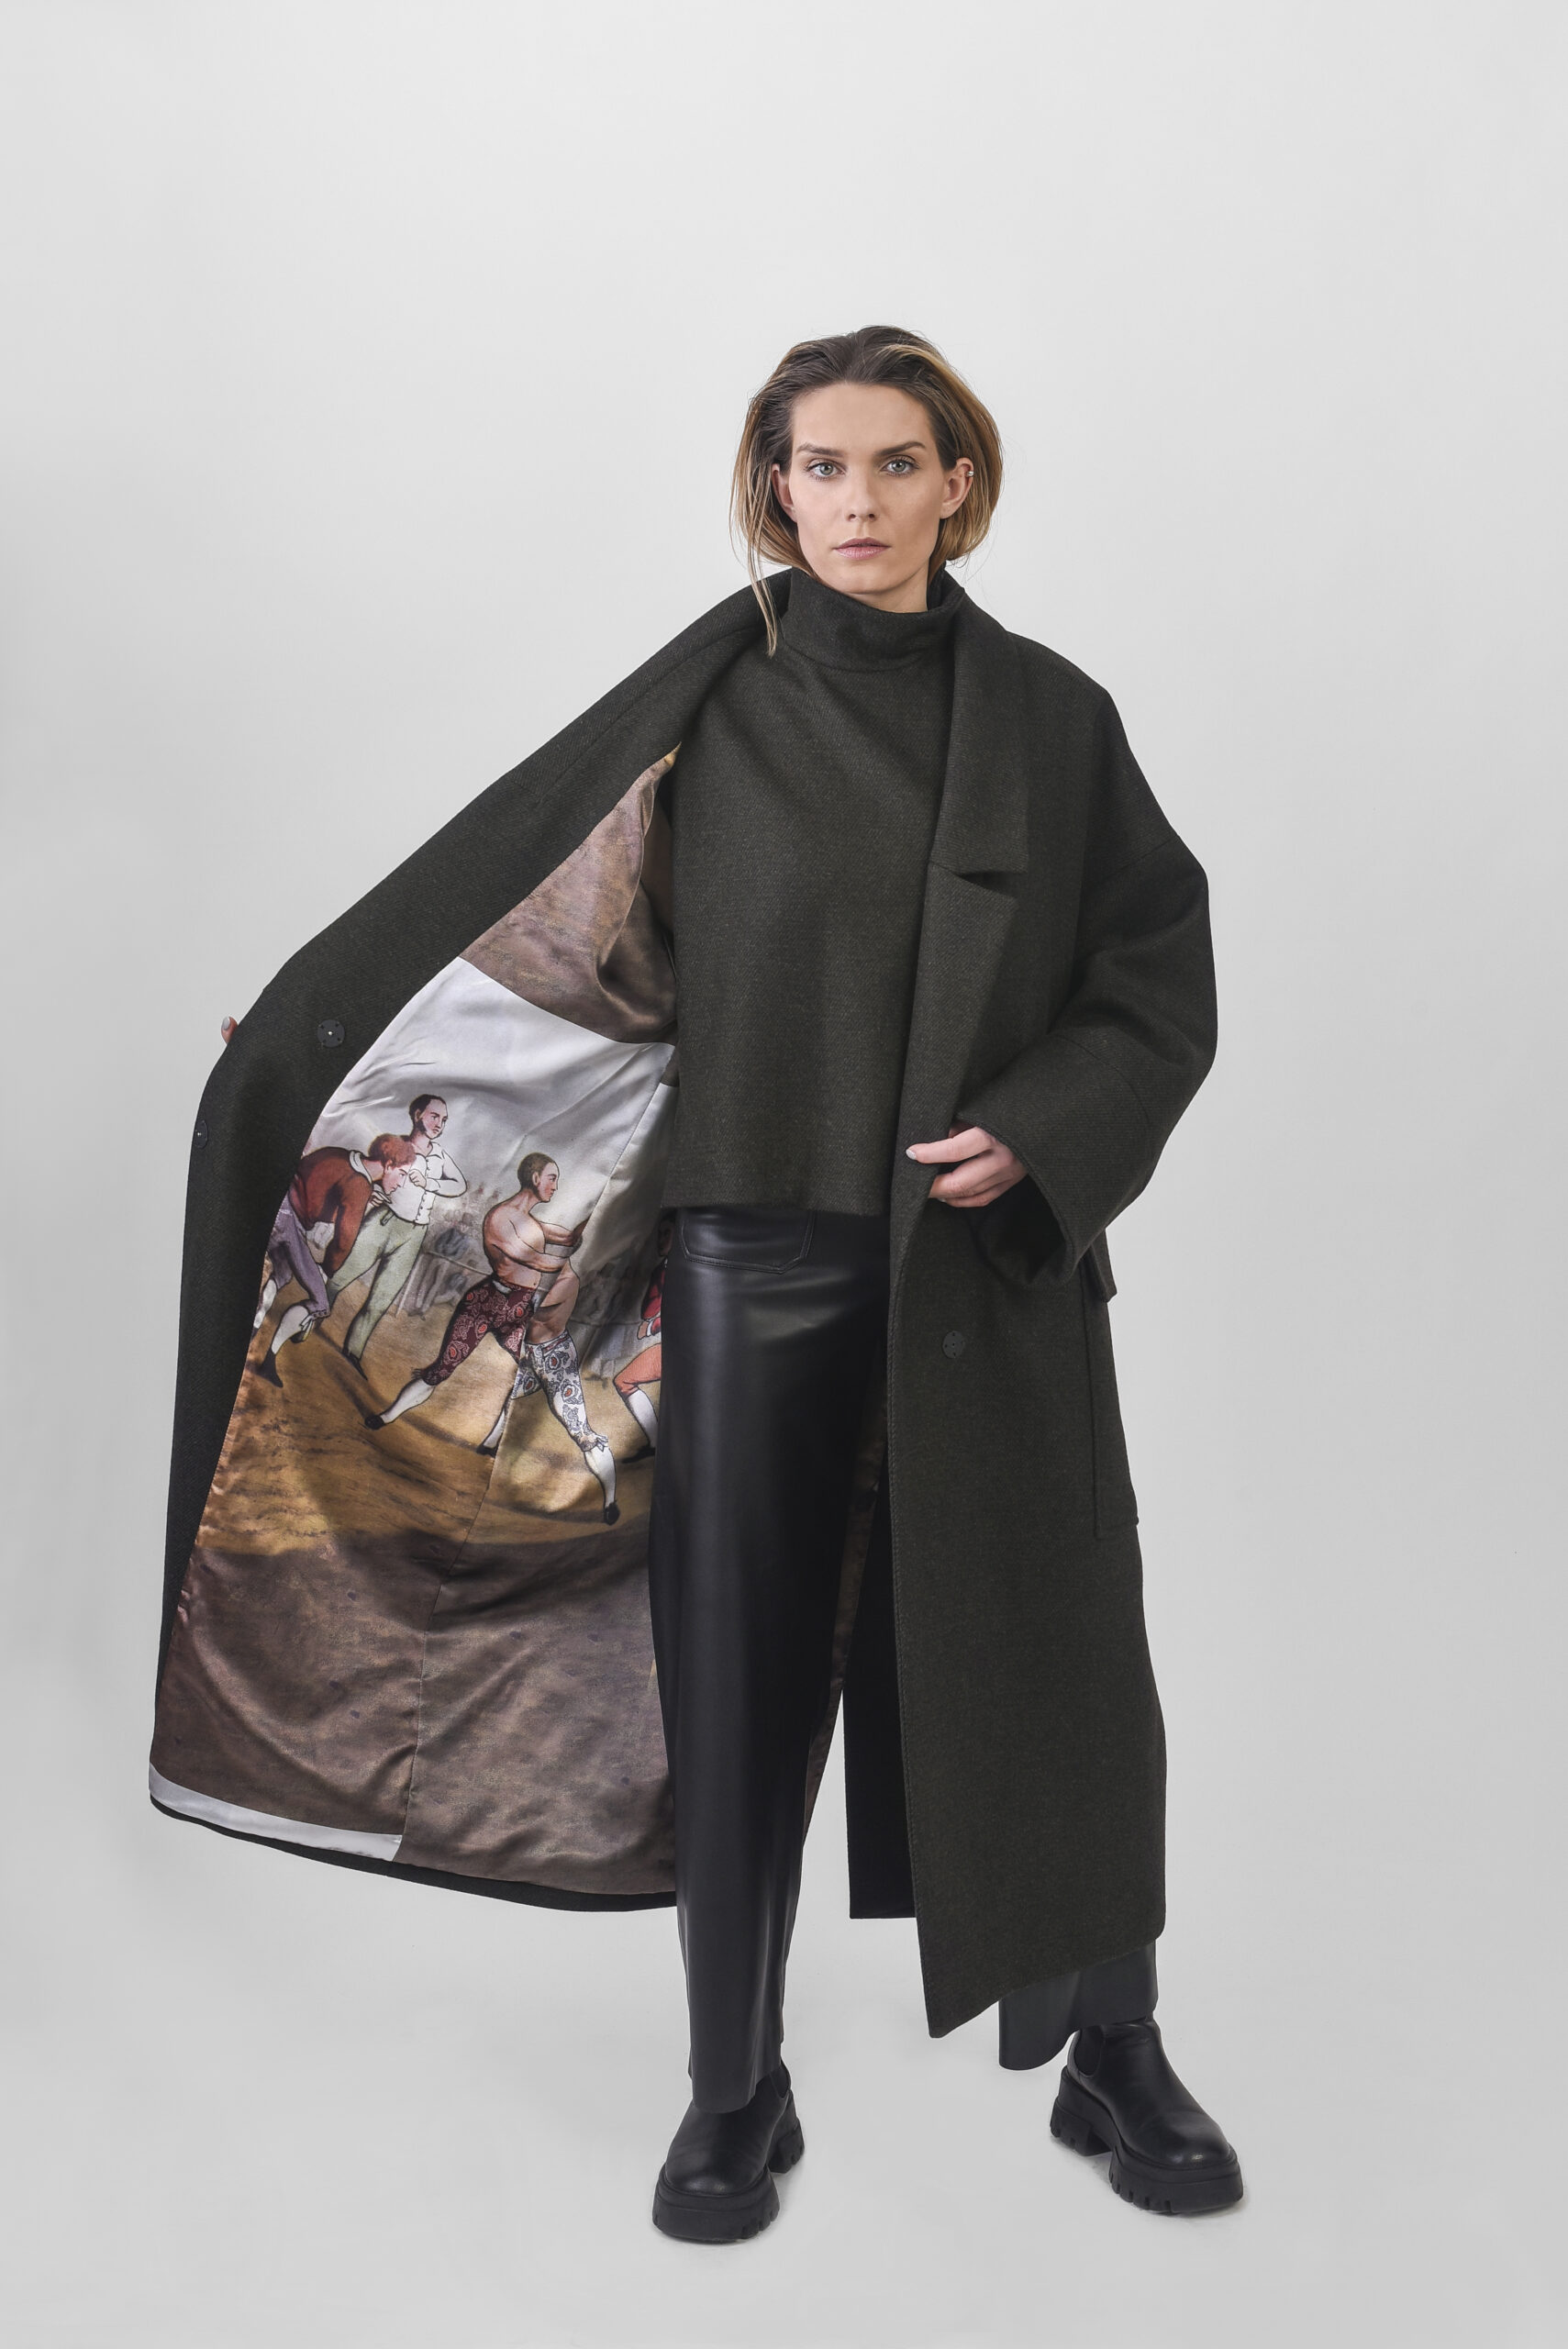 model with green oversize coat